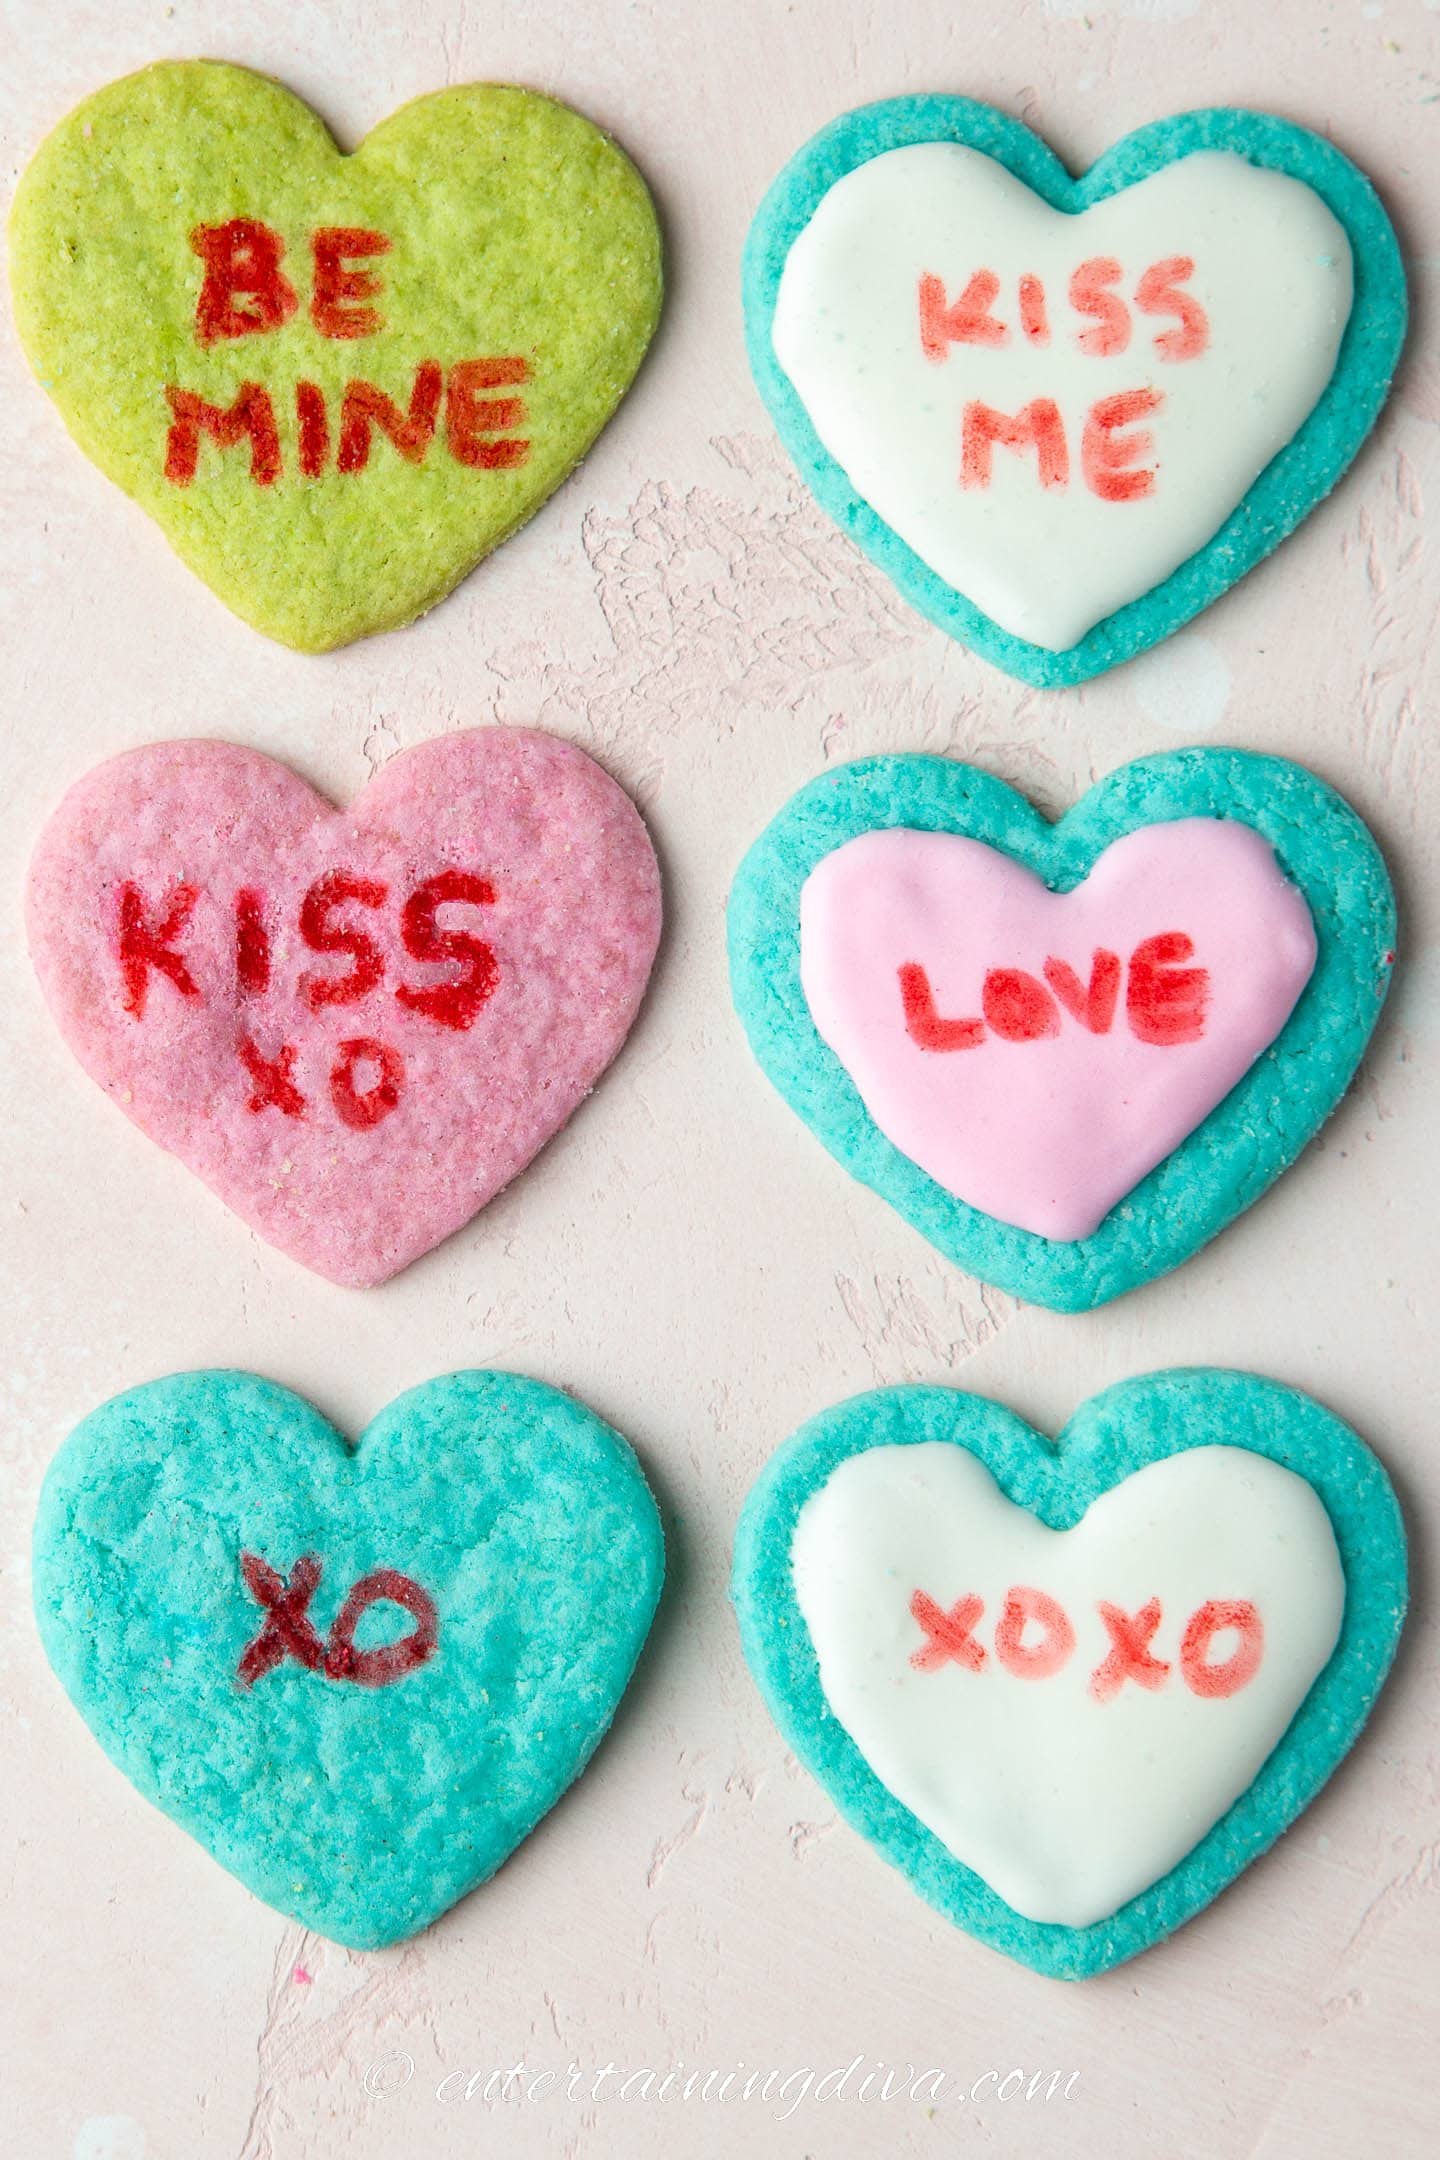 Conversation heart cookies with and without royal icing